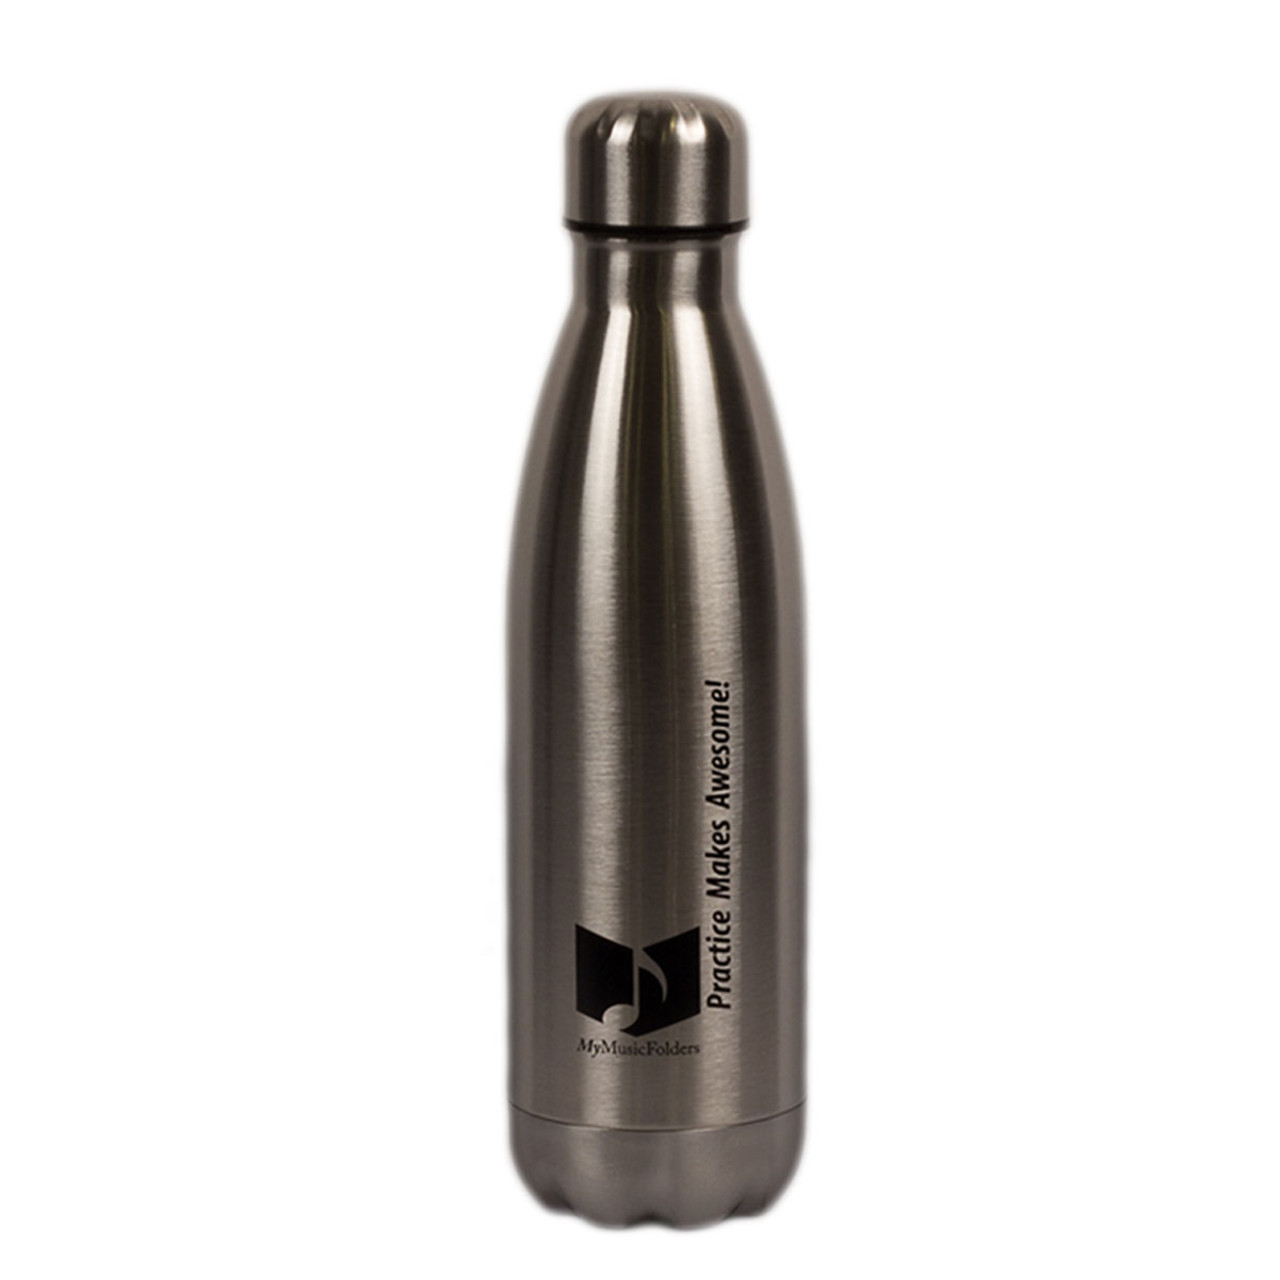 https://cdn11.bigcommerce.com/s-2nt4eo0lpn/images/stencil/1280x1280/products/175/427/accessories-water-bottle-1200__64389.1548901098.jpg?c=2?imbypass=on